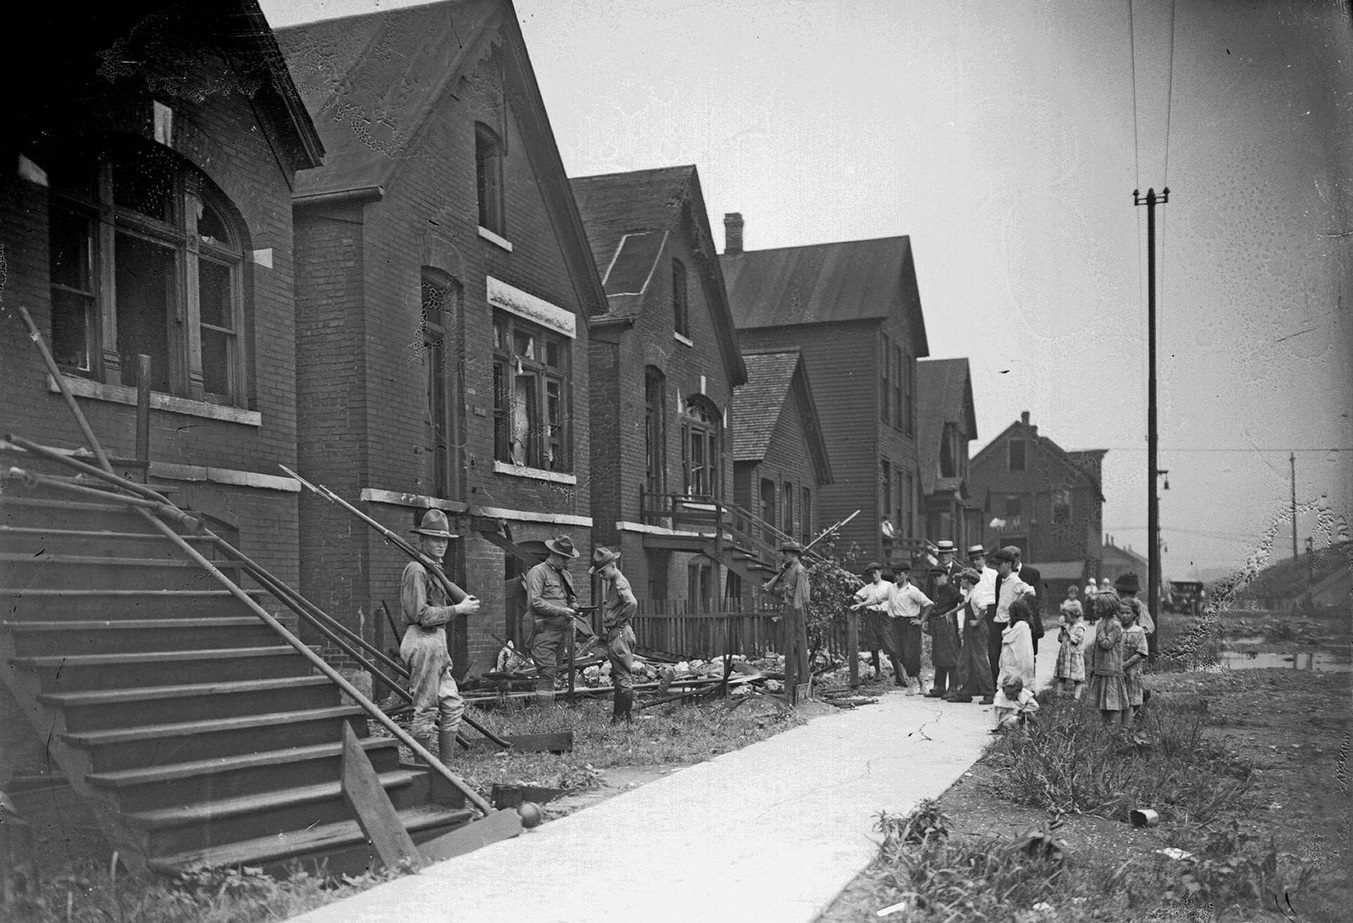 Chicago race riot, soldiers with rifles standing guard at vandalized house, Chicago, Illinois, July 30, 1919.